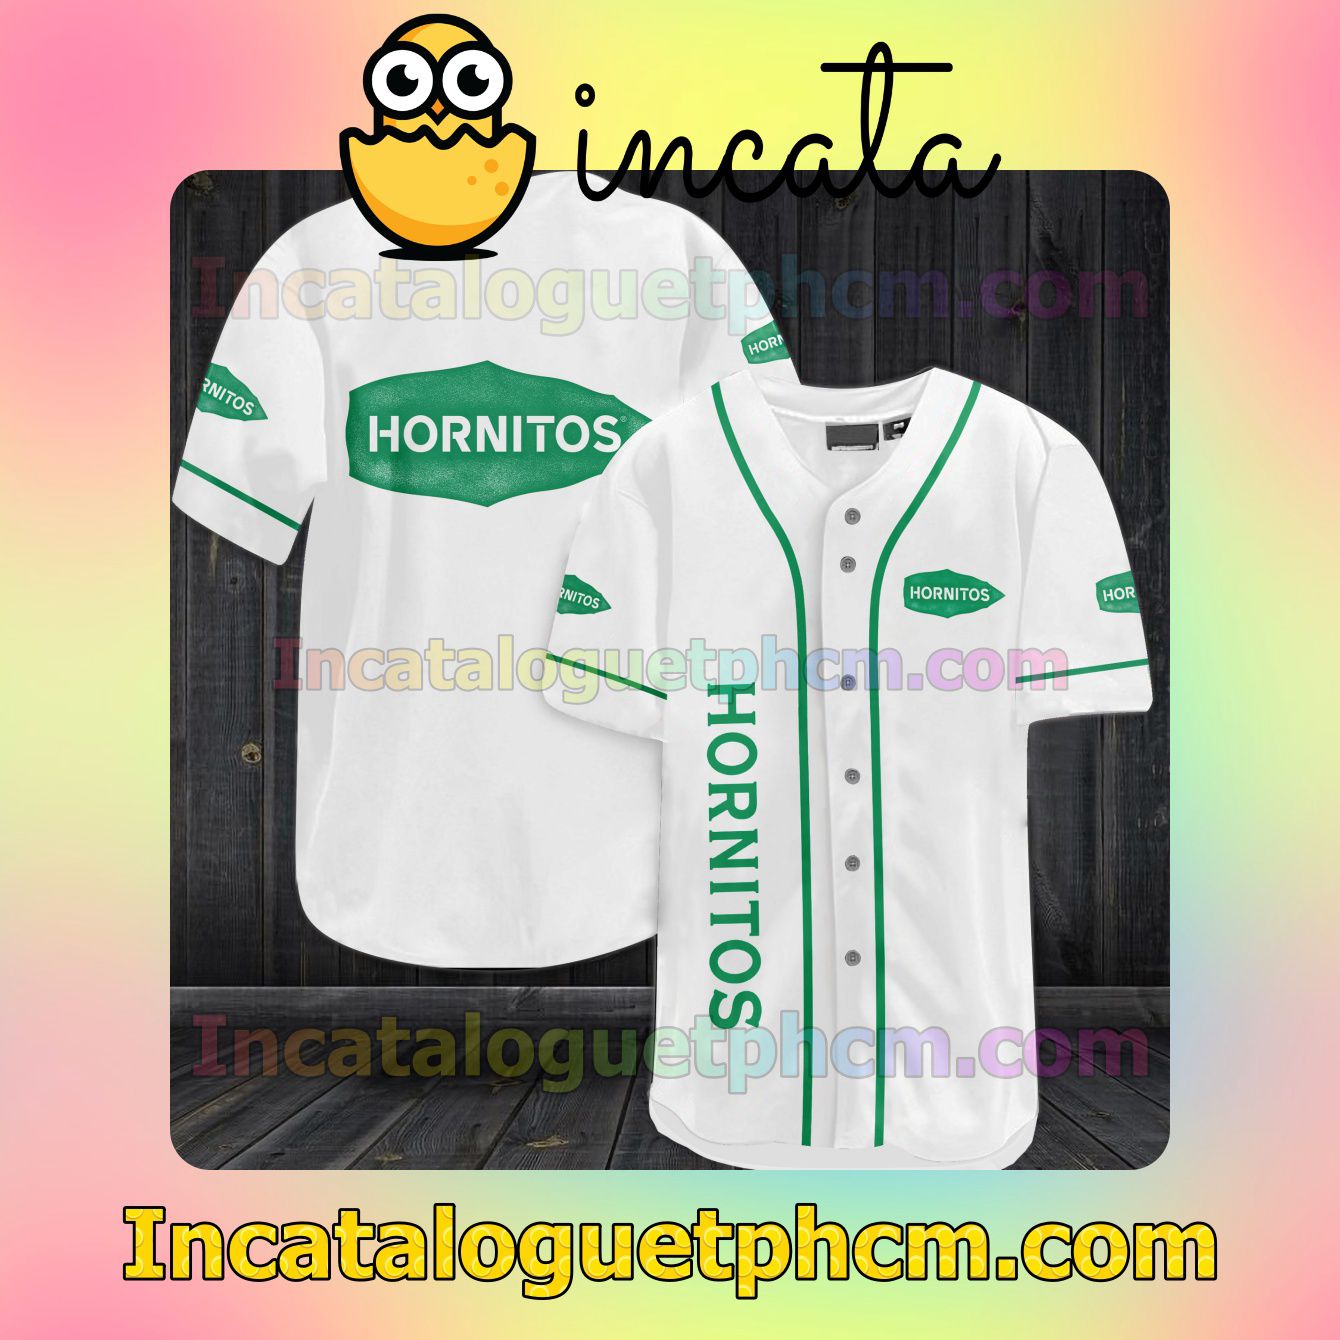 Buy In US Hornitos Tequila Baseball Jersey Shirt